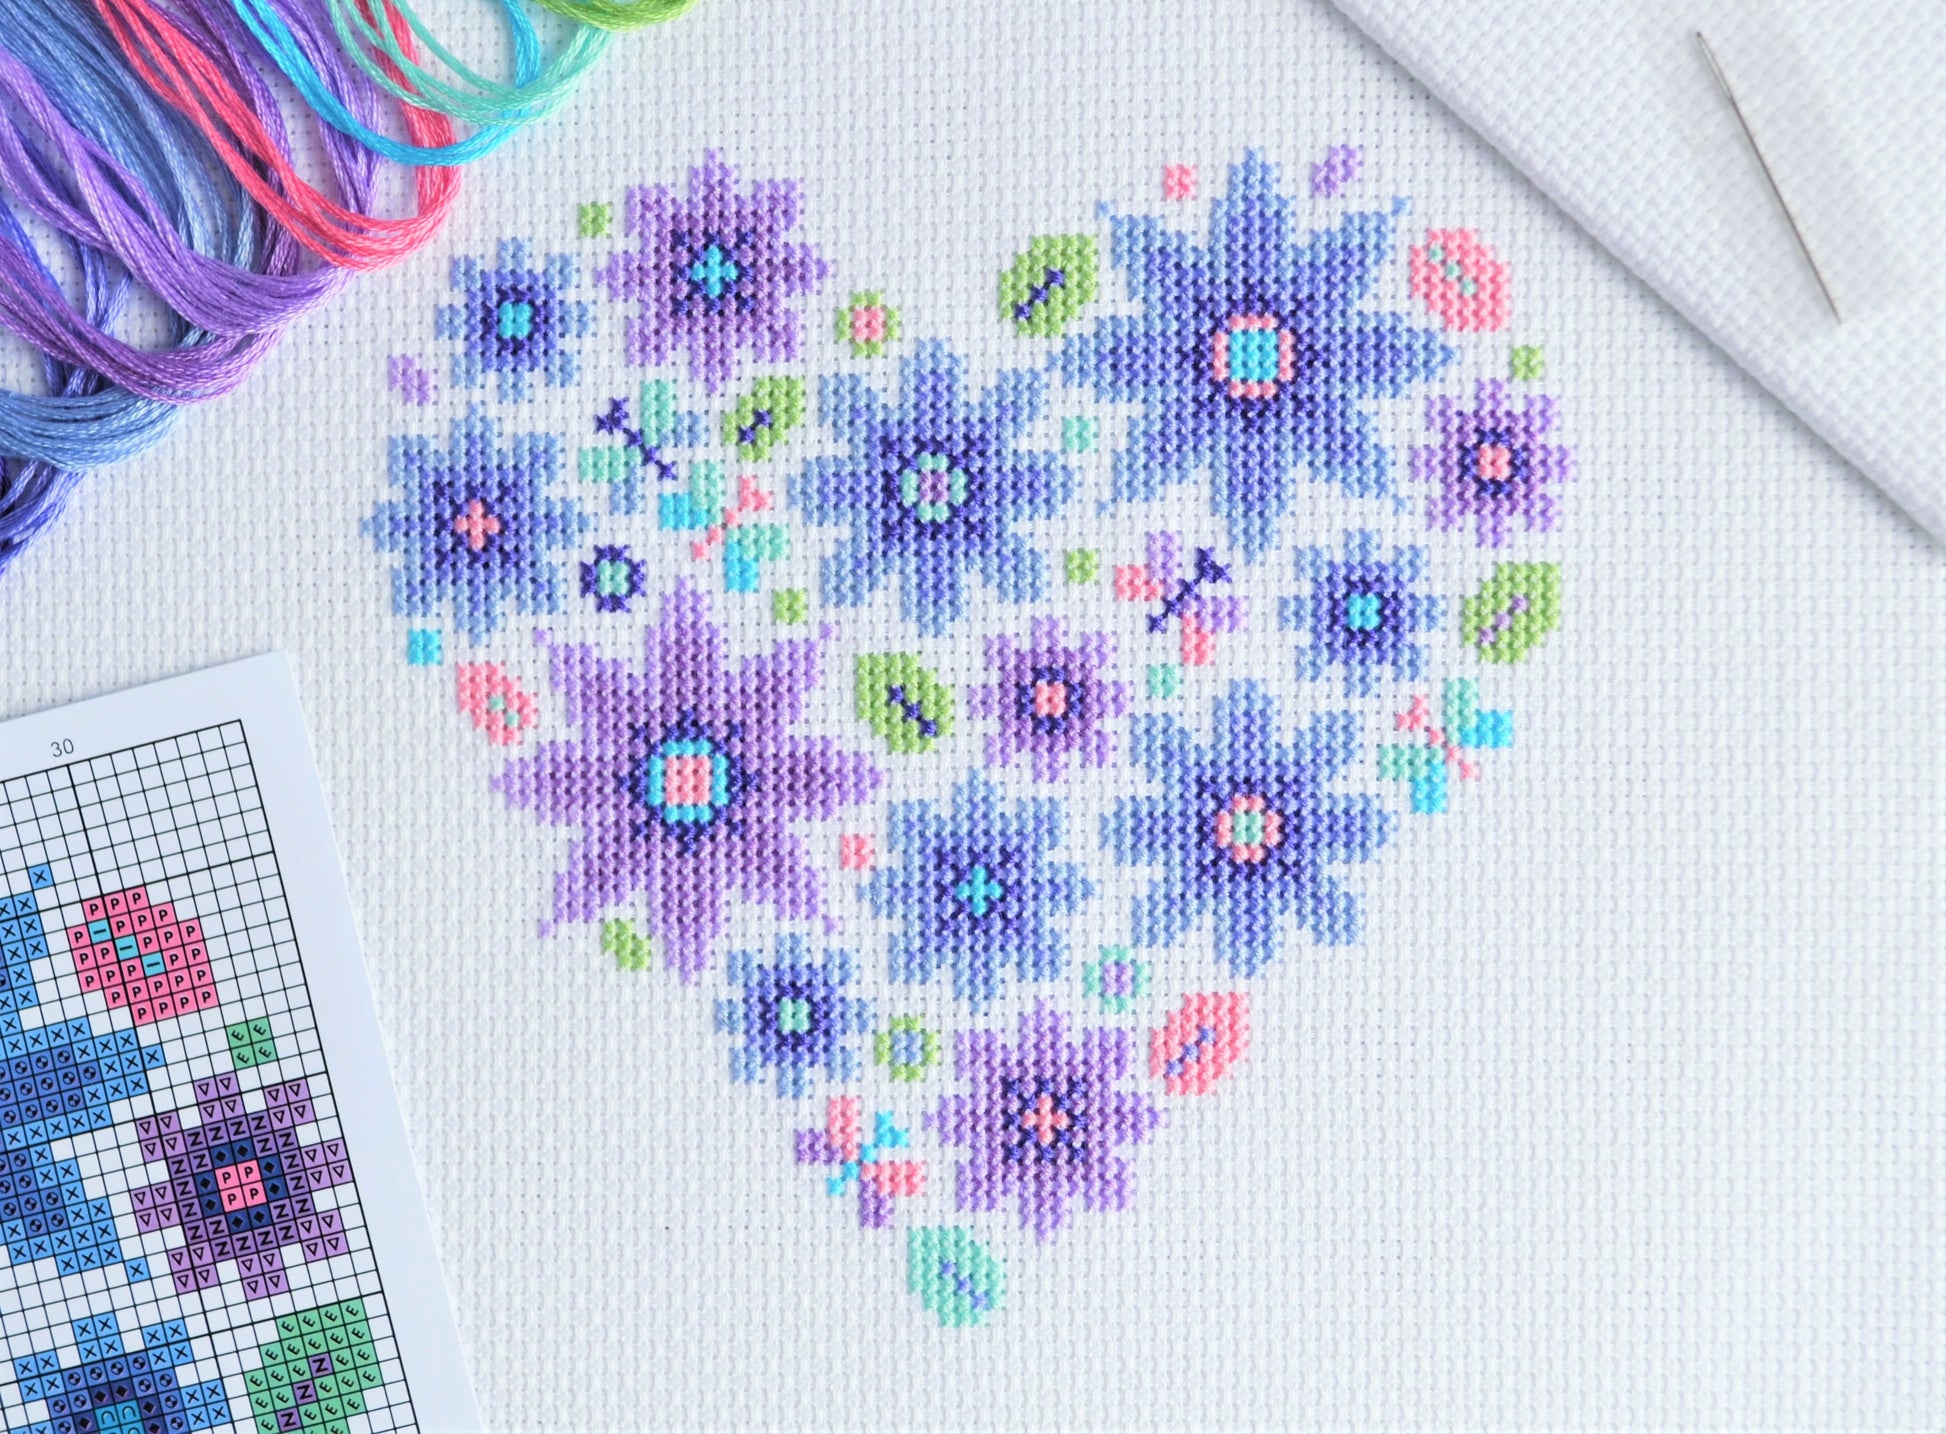 Mini Floral Heart Cross Stitch Kit – The World in Stitches